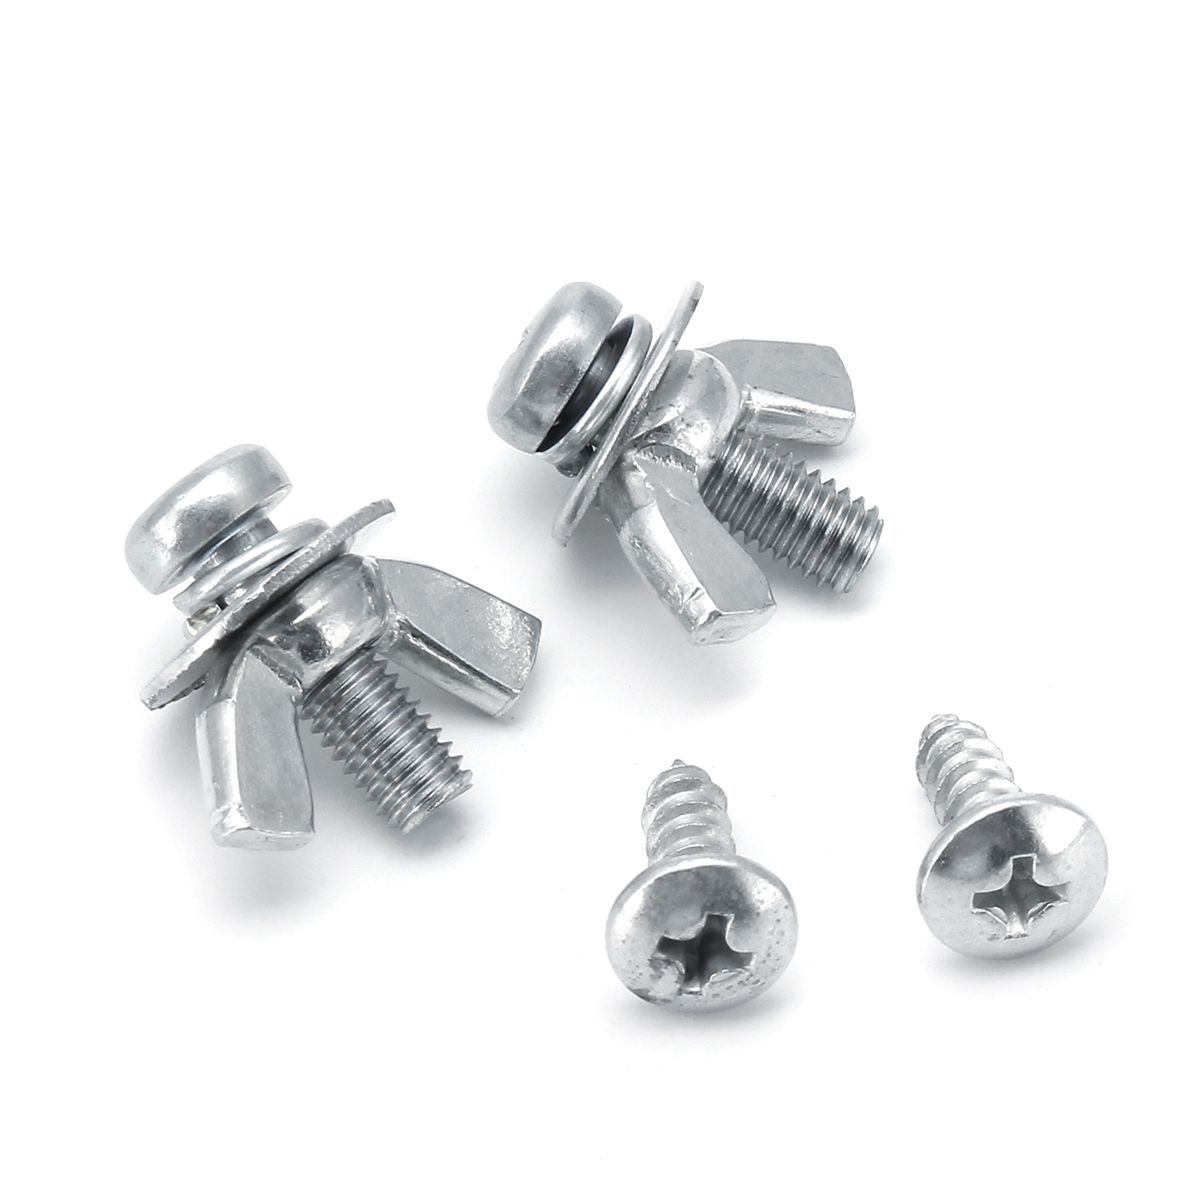 Air-Supply-Pipe-Bracket-Pipe-Strap-Clamps-Screws-For-Defroster-Car-Heater-1375791